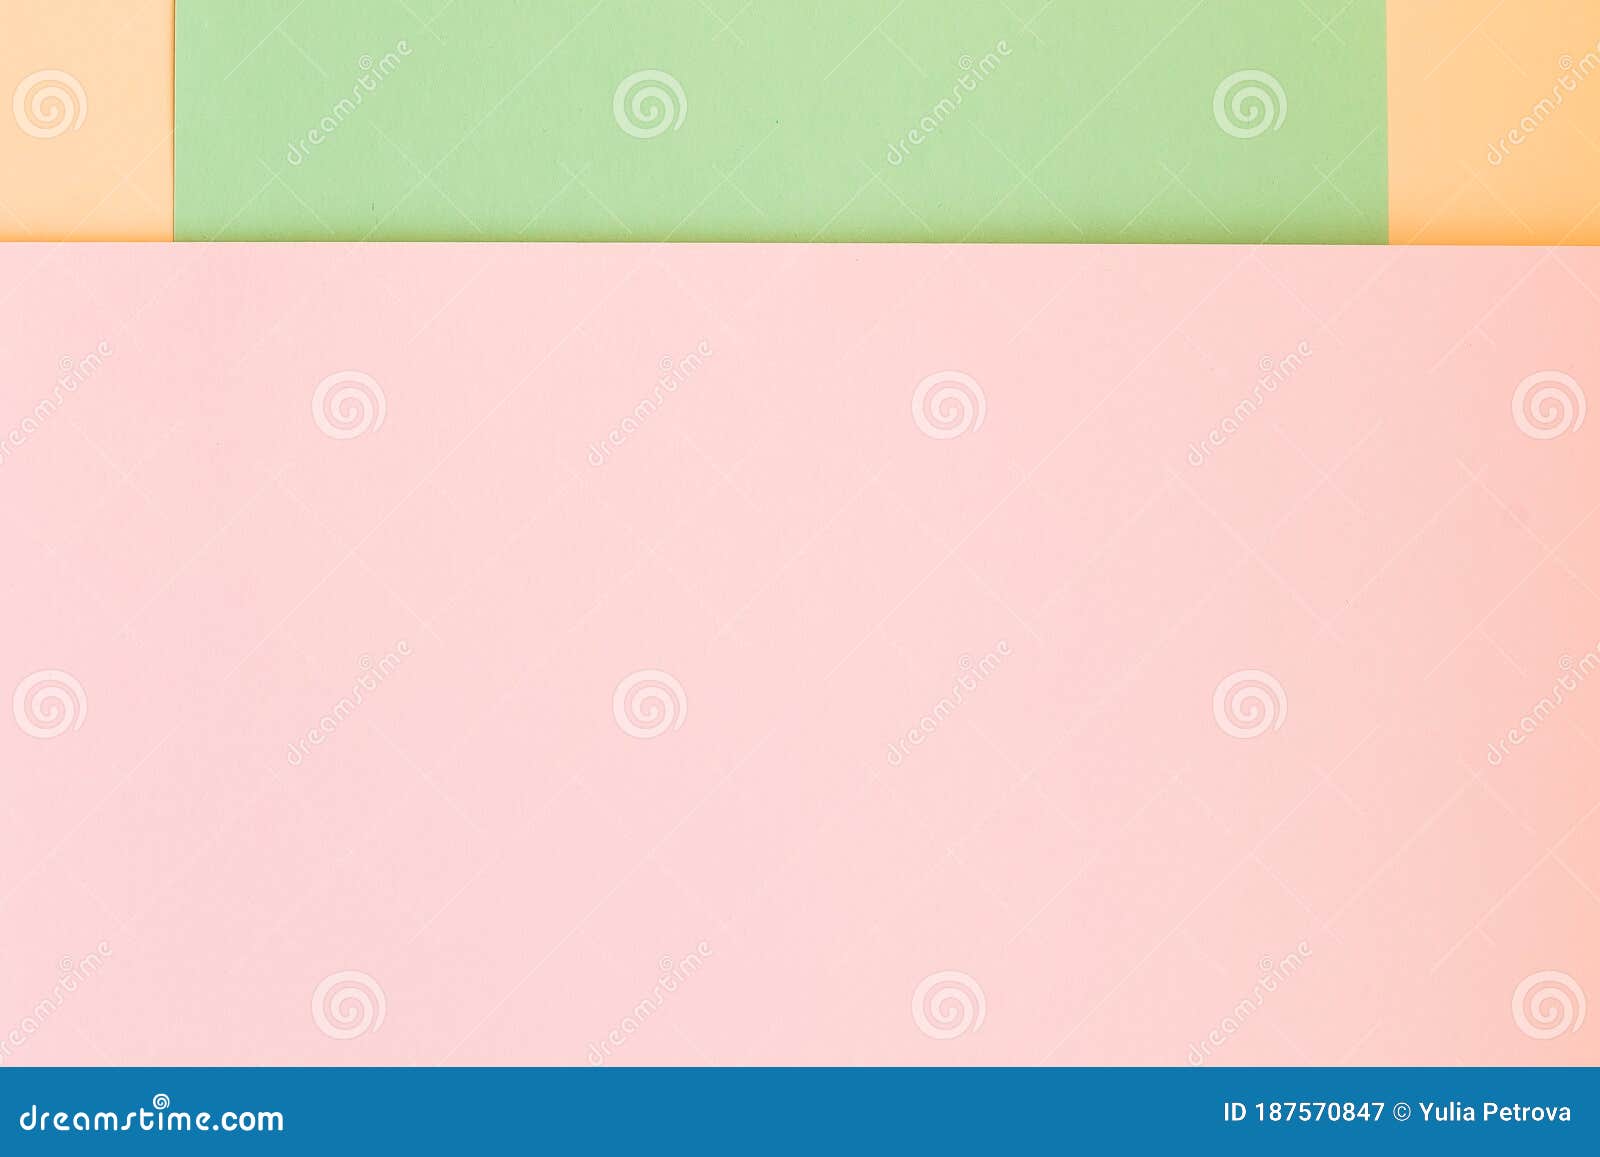 Abstract pastel colored paper texture minimalism background